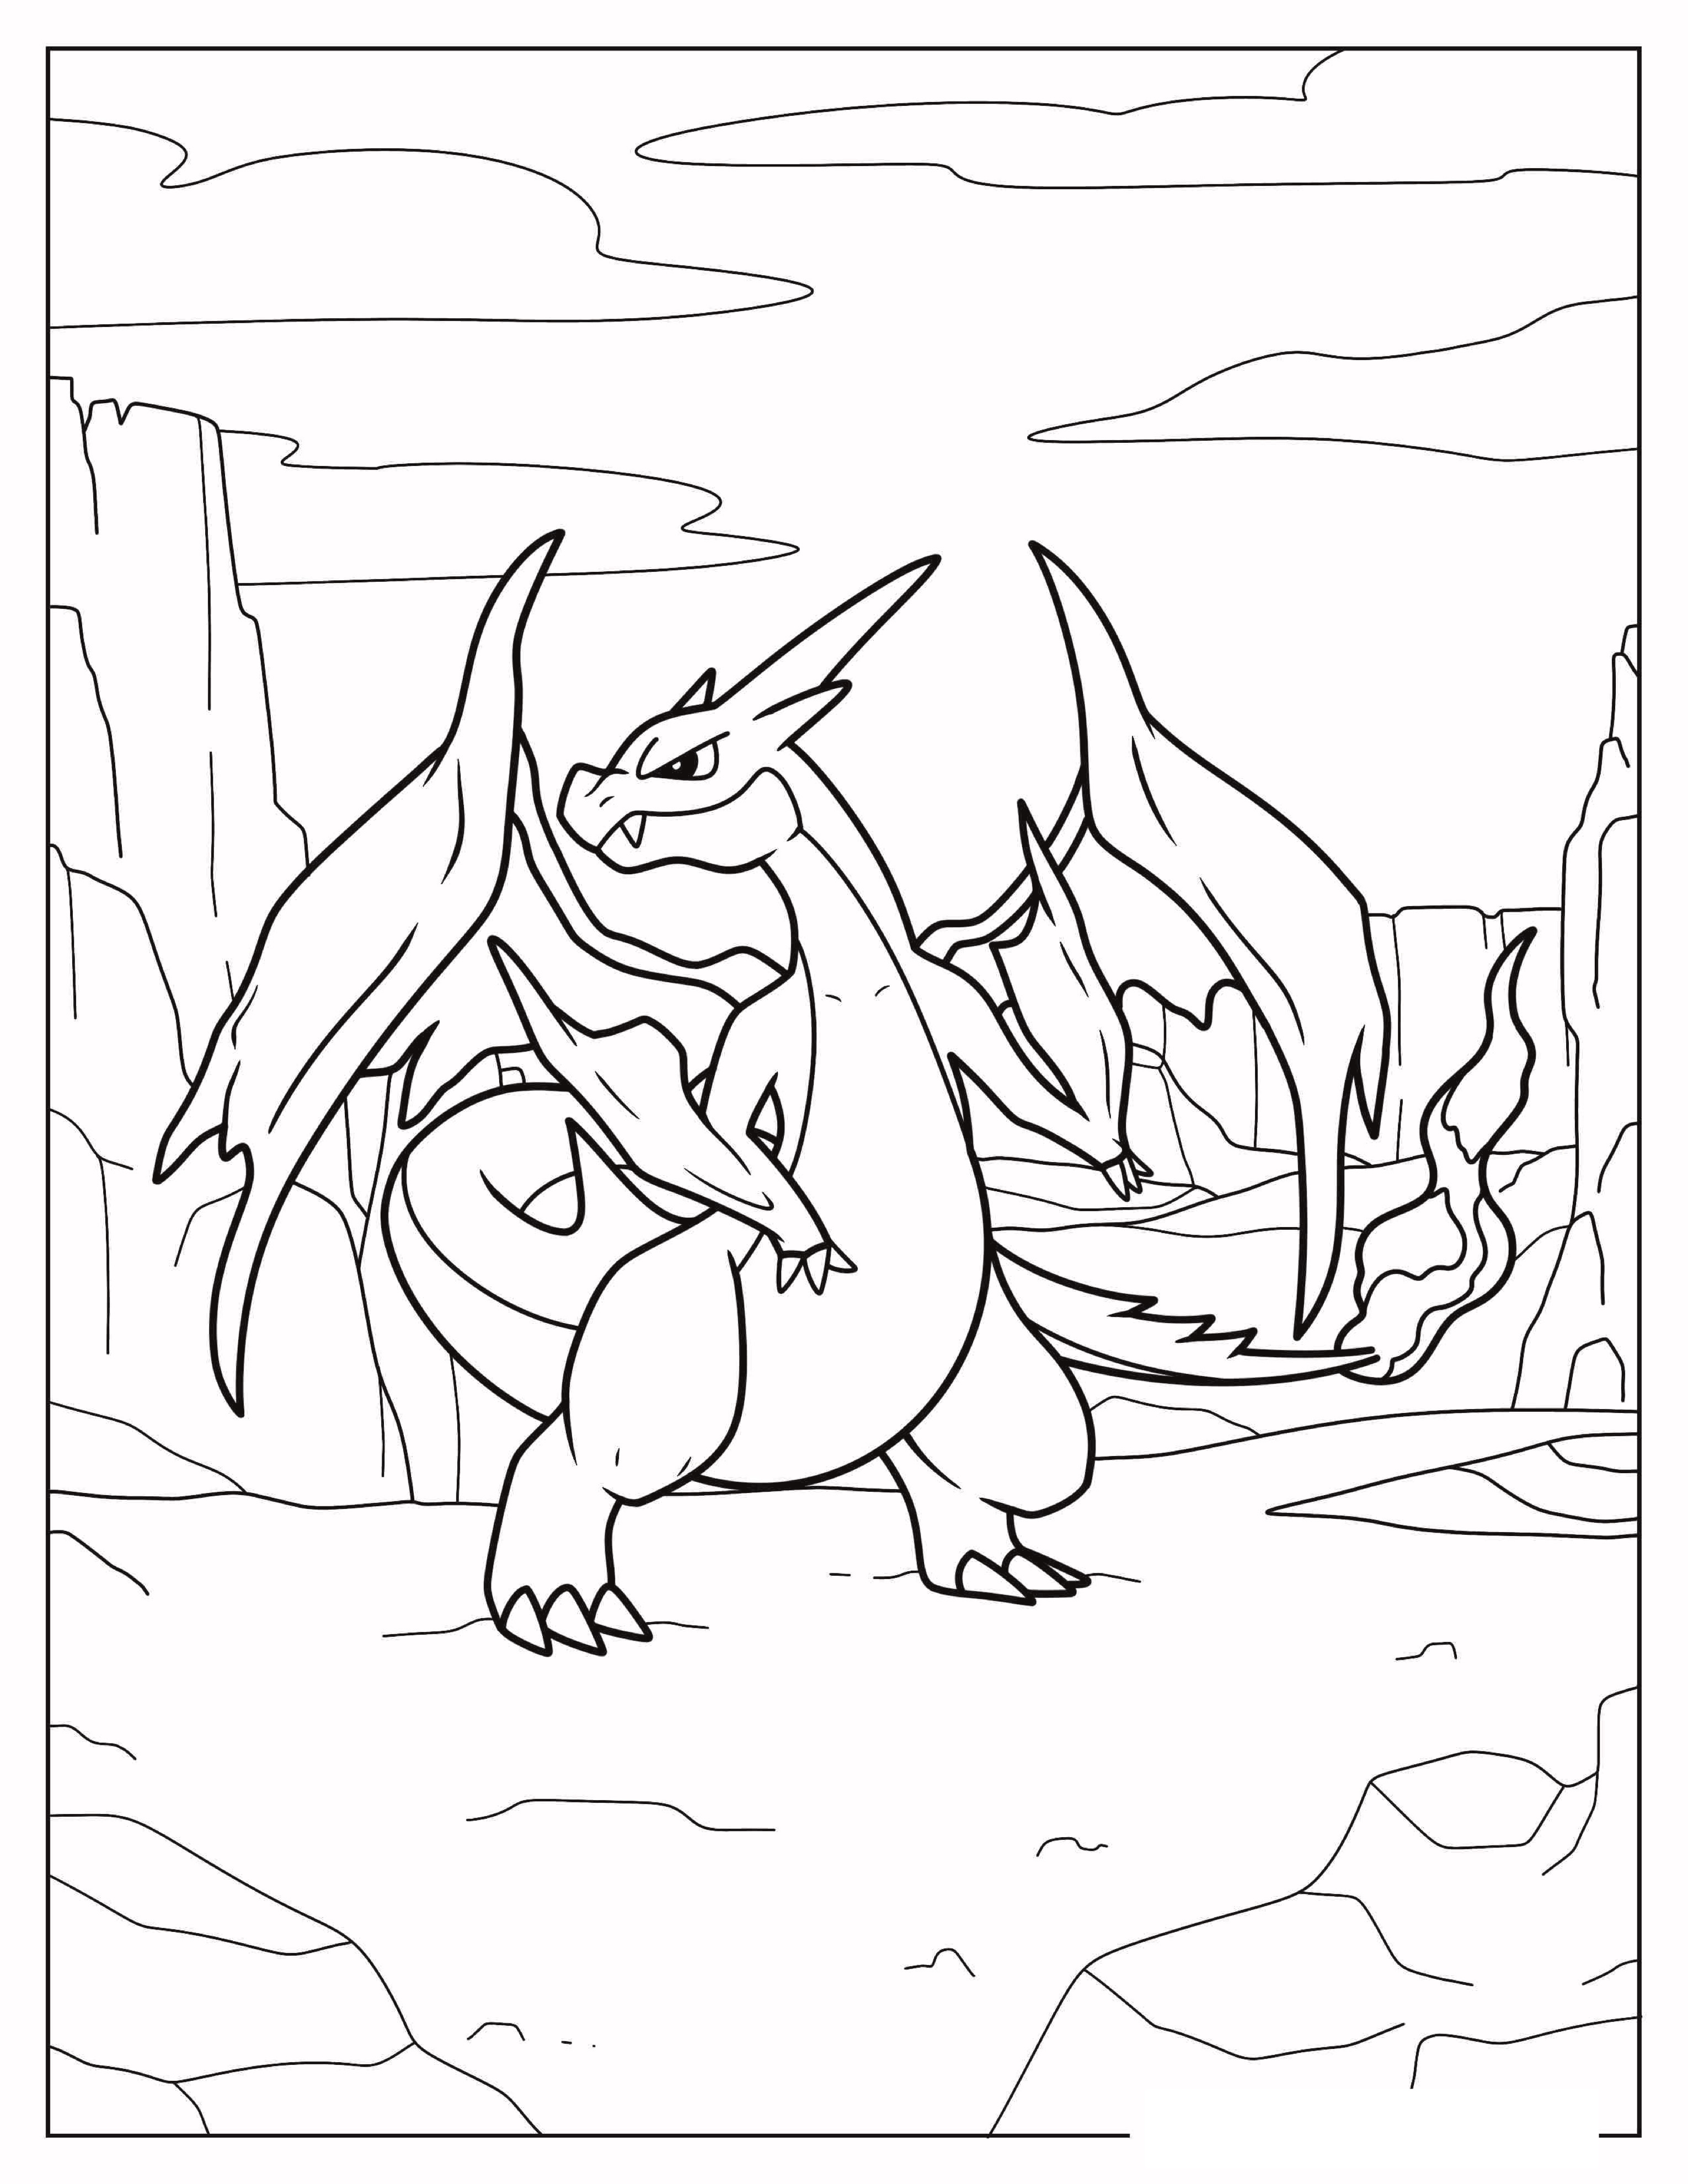 Coloring-Page-Of-Charizard.jpg